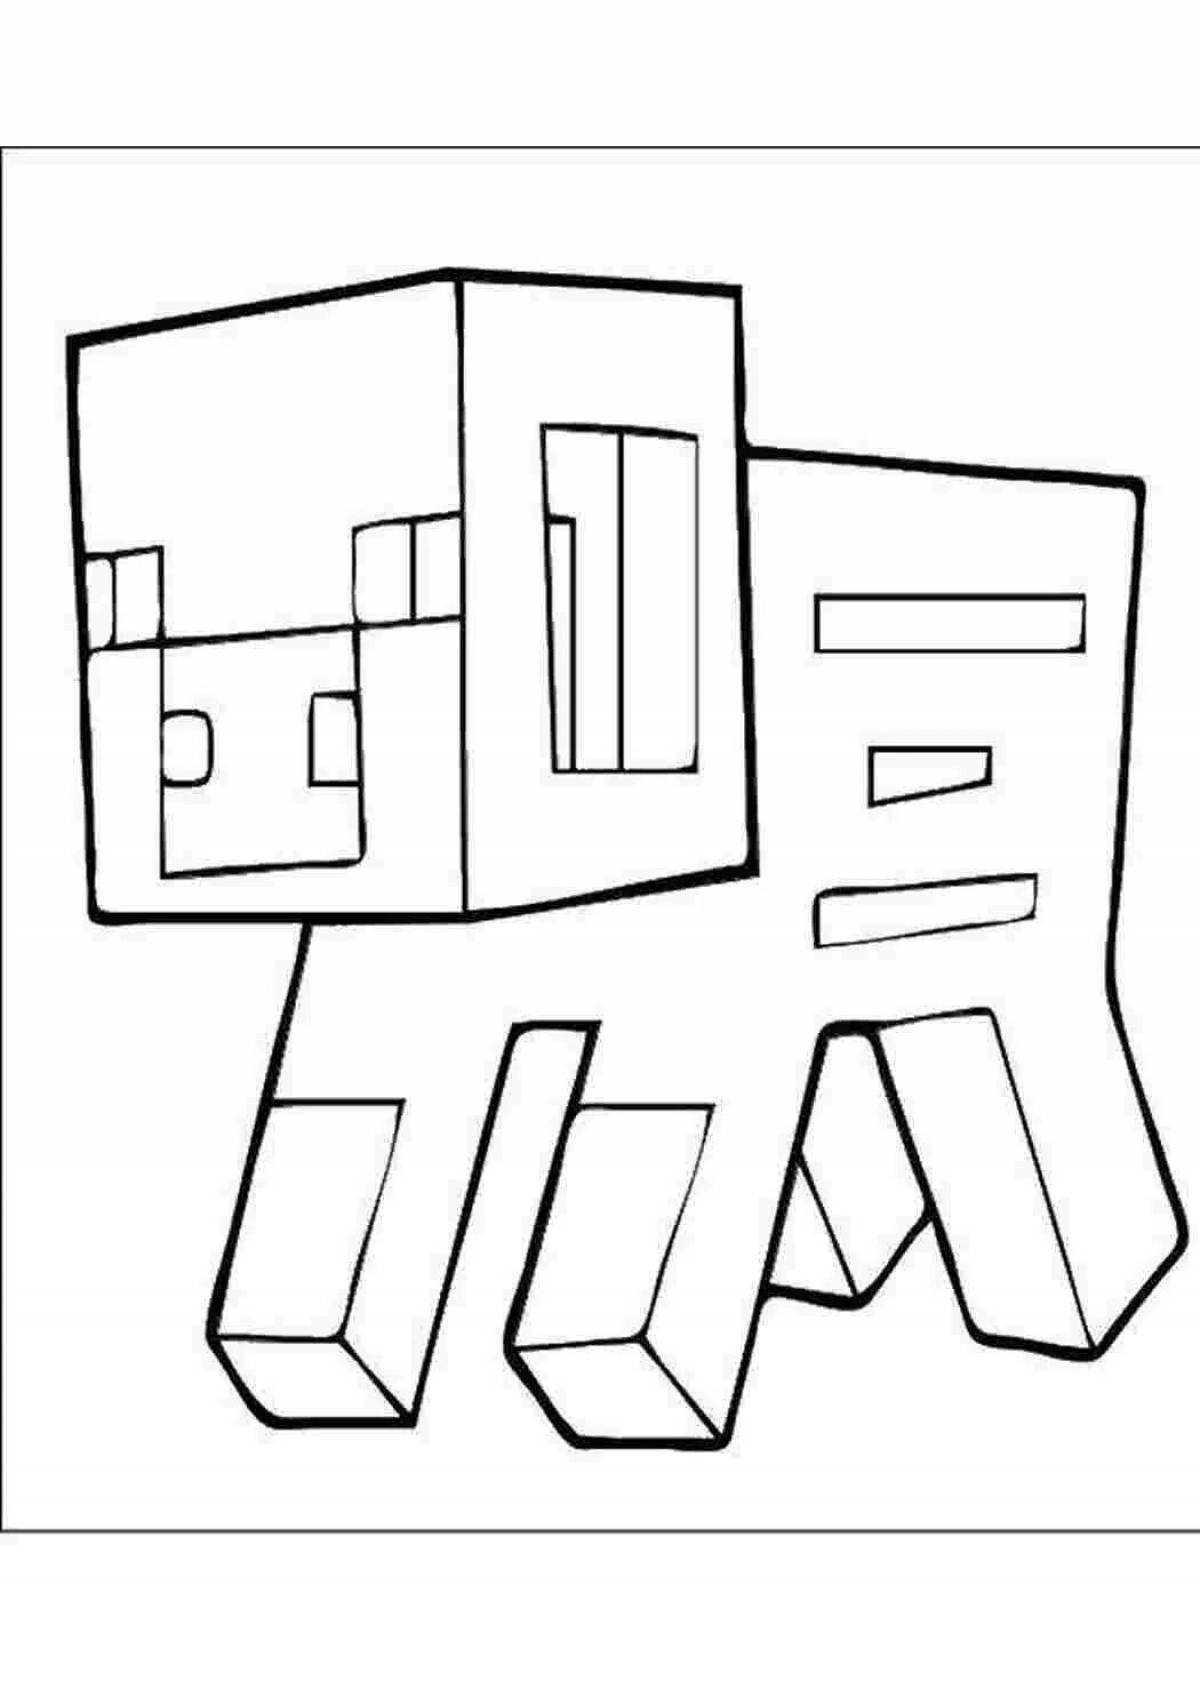 Colorful vibrant minecraft animal coloring page